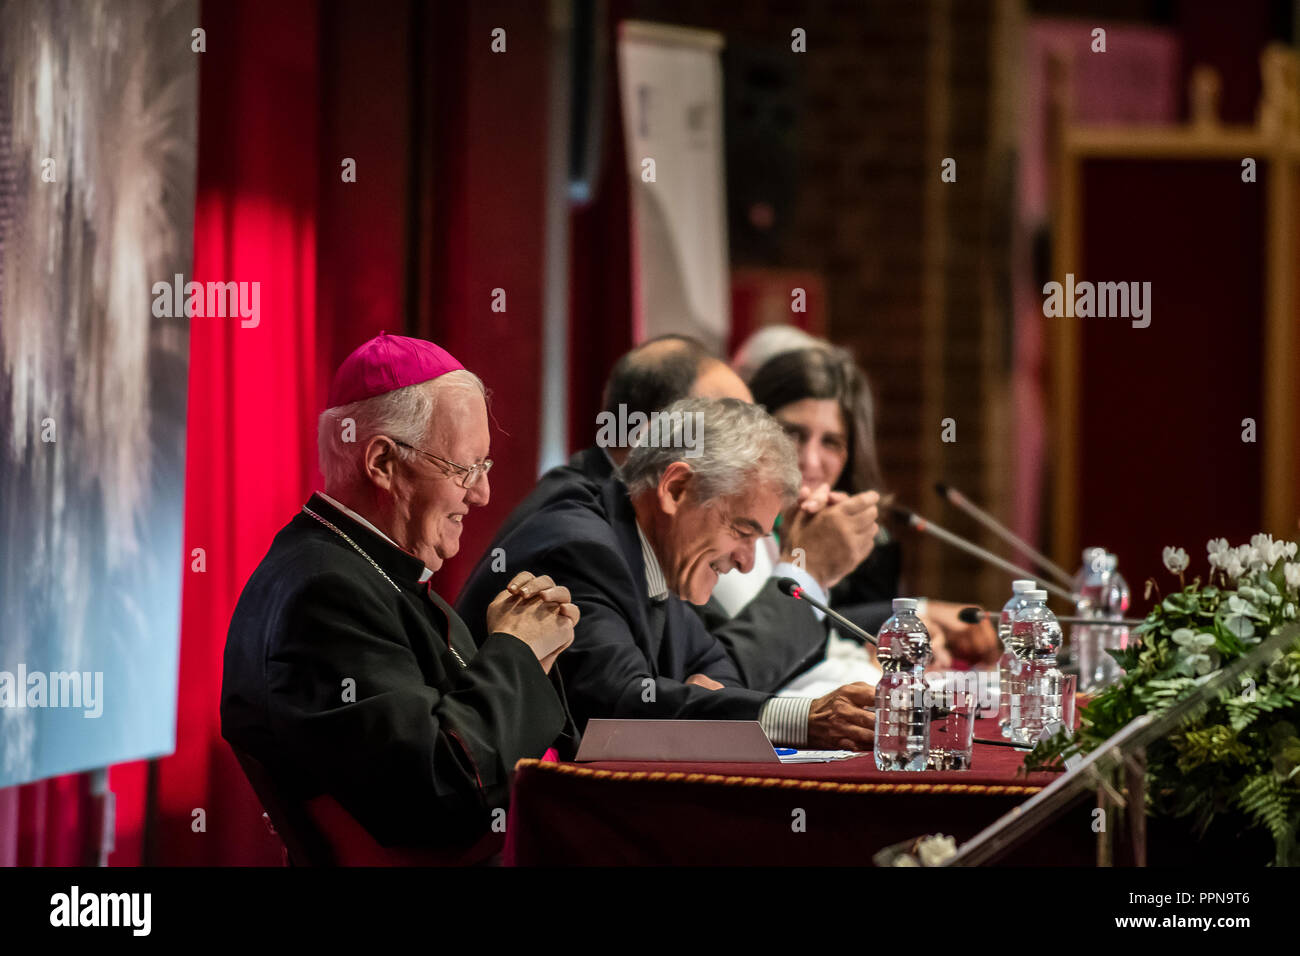 Italy Piedmont Turin 27th September 2018 - The MIBAC returns to the public the chapel of the Shroud of Guarino Guarini - Royal Theater Foyer del Toro -Press day - authority Credit: Realy Easy Star/Alamy Live News Stock Photo